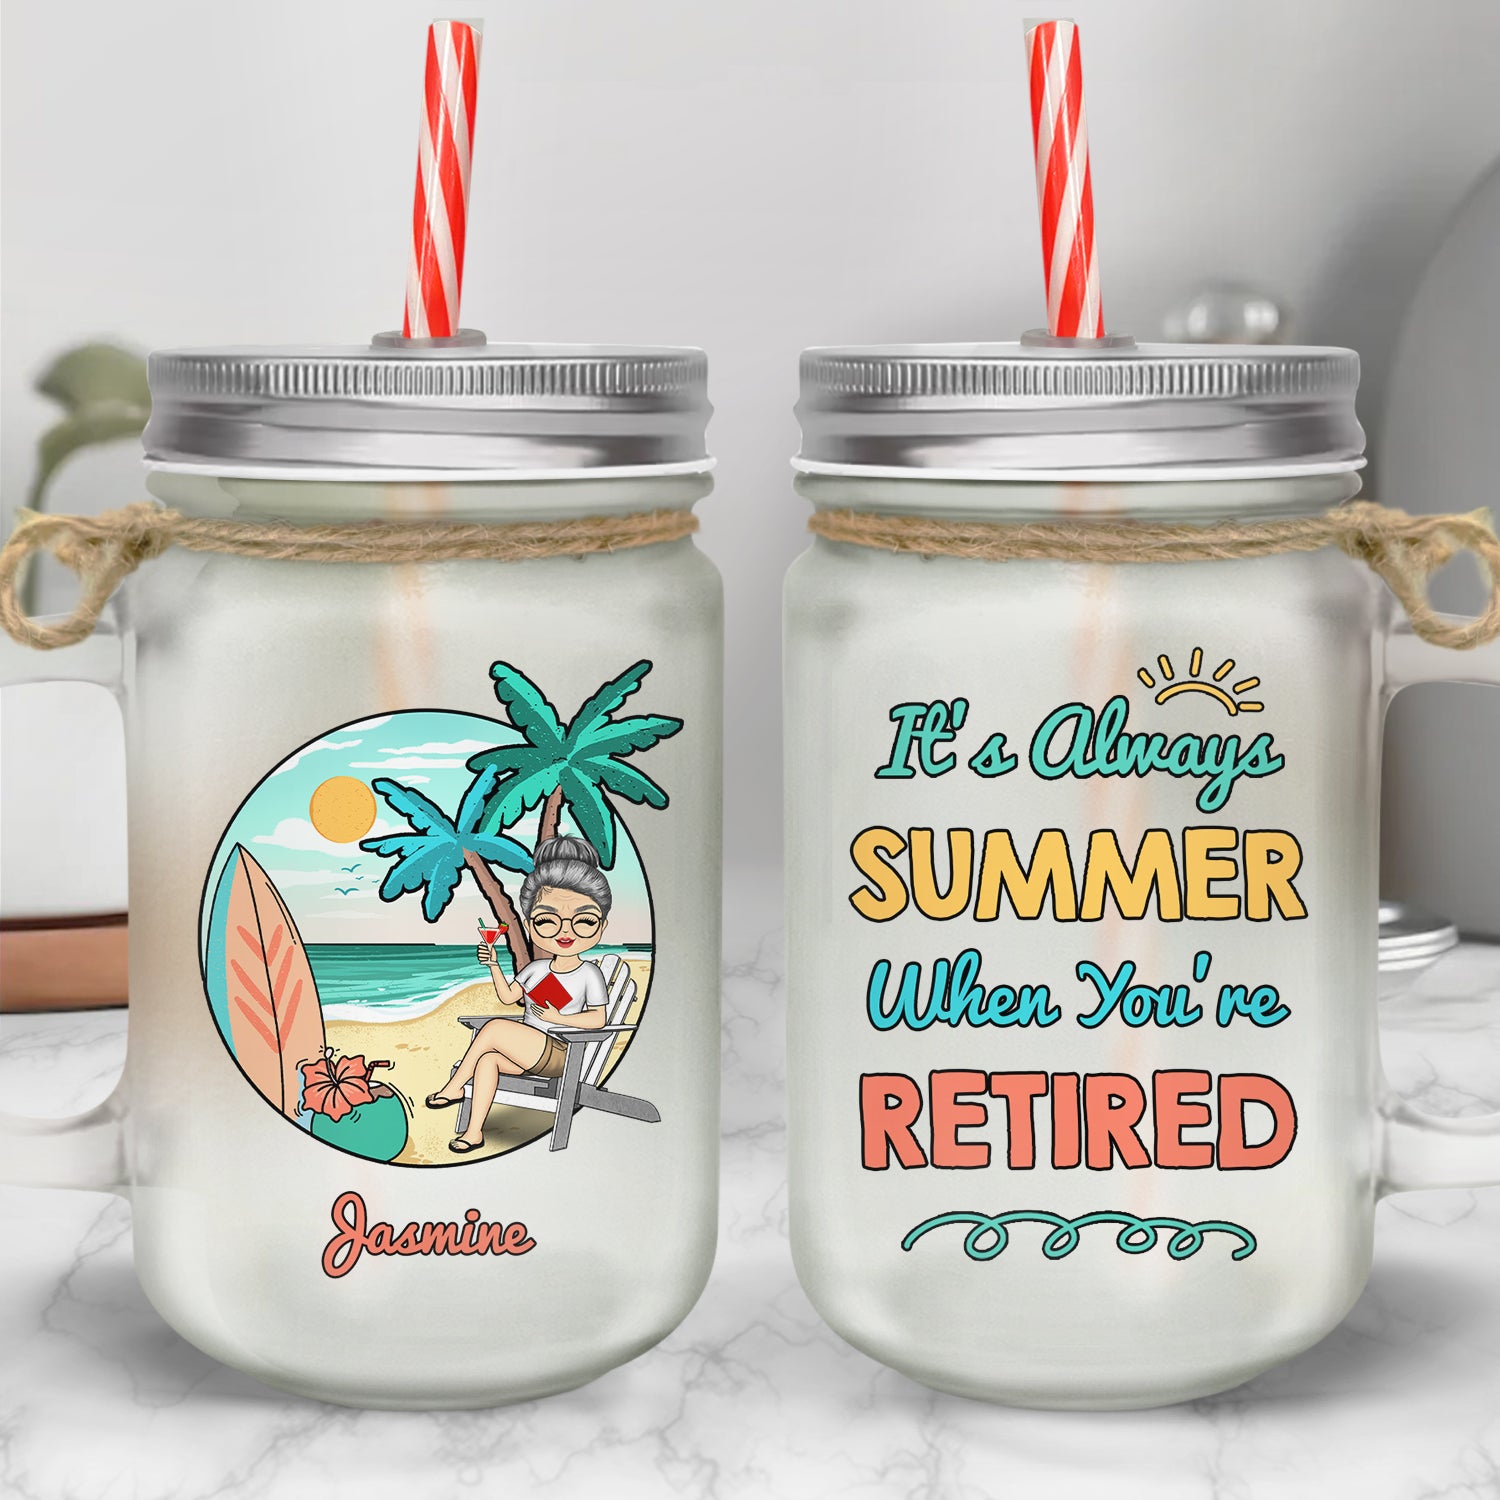 Summer When You're Retired - Retirement Gift For Women Men - Personalized Mason Jar Cup With Straw